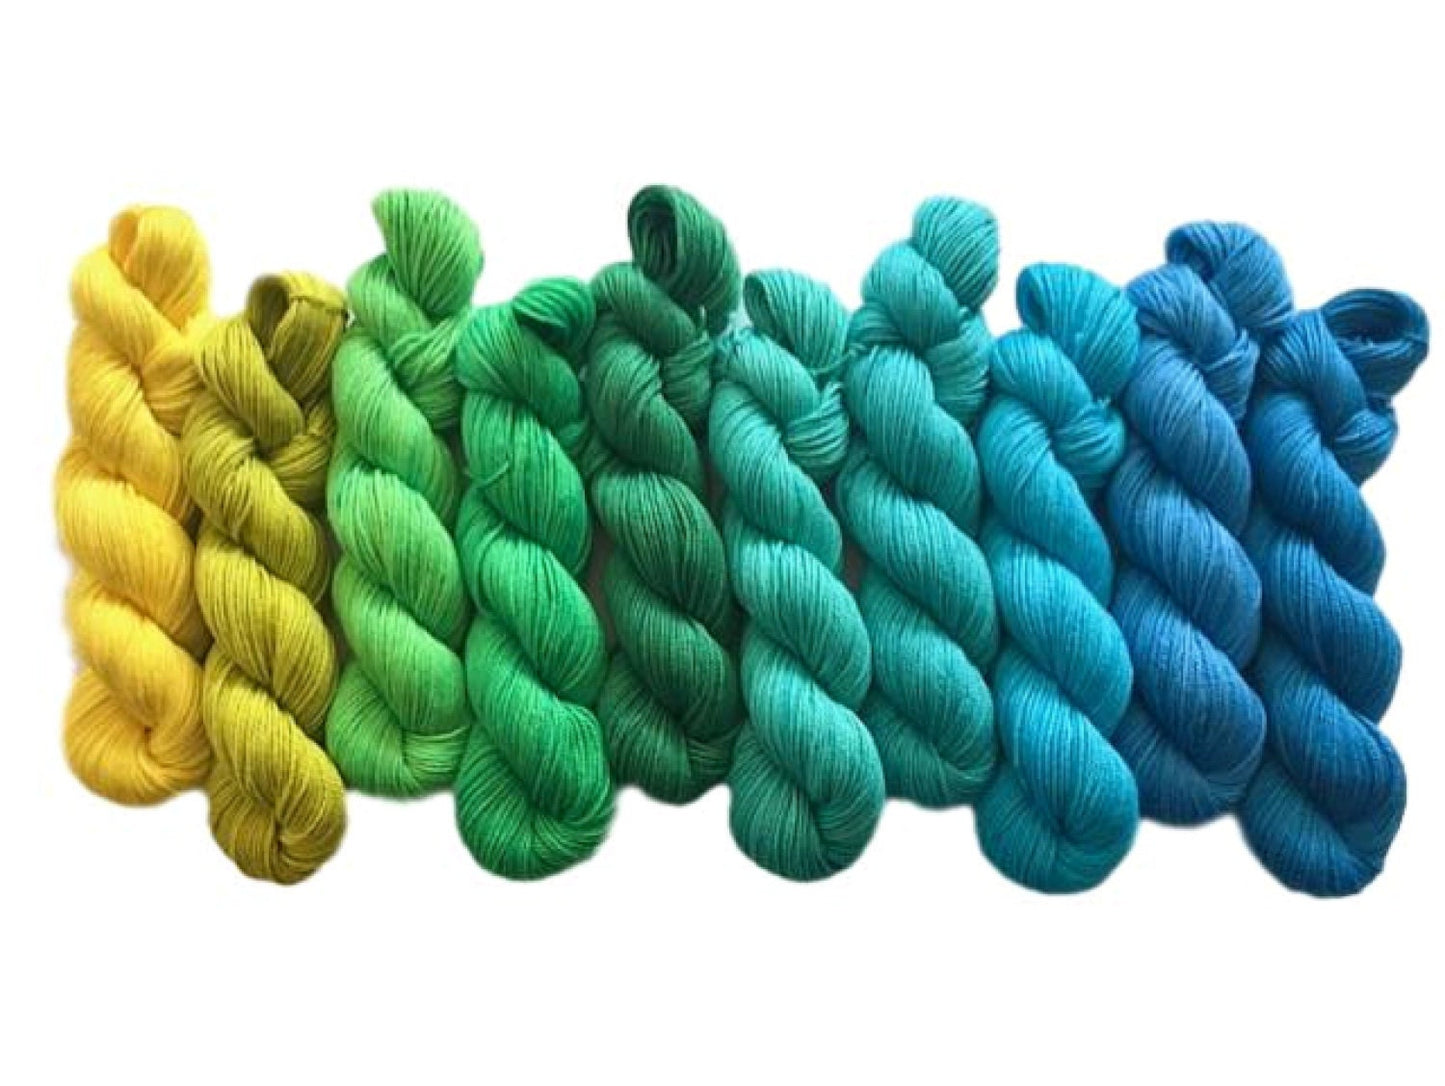 Vegan Gradient Yarn Kit - Hand Dyed Bamboo Cotton - Fingering / Sock Weight - Yellow Green Teal Turquoise Semi Solid - 3 Ply Knitting Thread